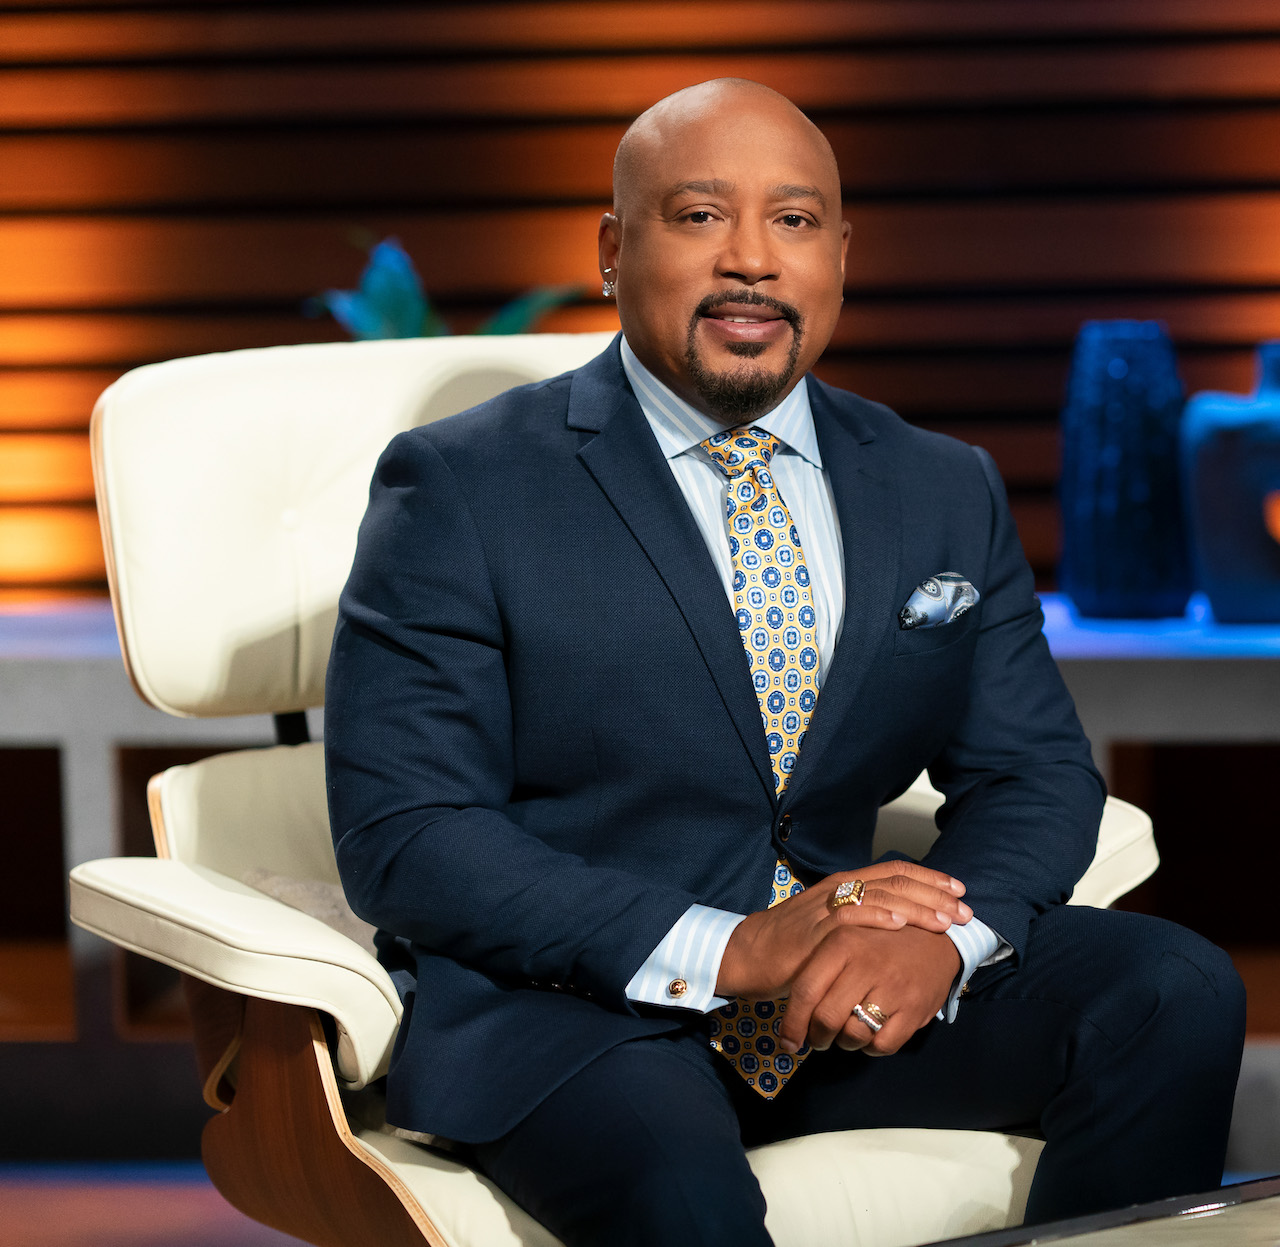 ‘Shark Tank’: Daymond John Gets Asked This Question ‘All the Time’ About Kevin O’Leary